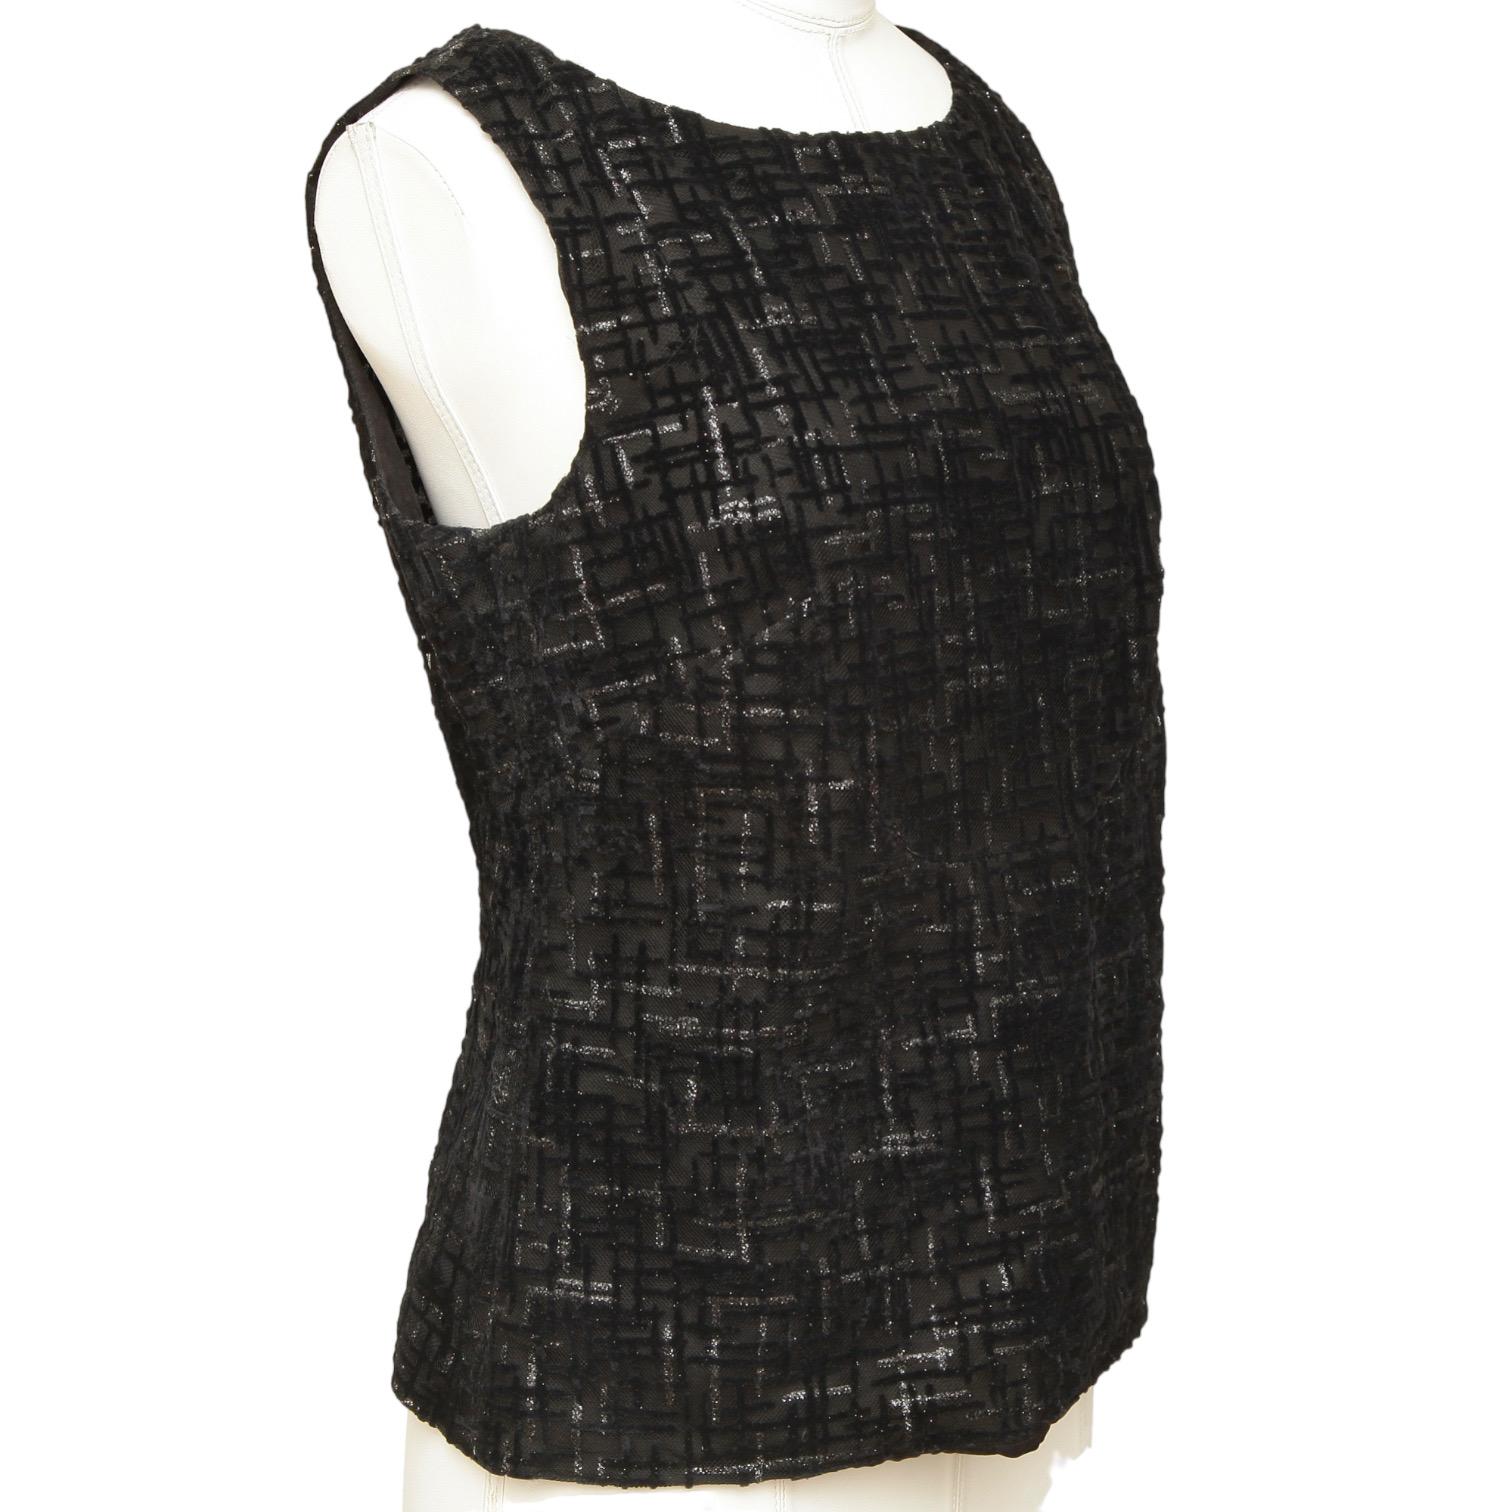 GUARANTEED AUTHENTIC CHANEL SPRING 2012 BLACK SLEEVELESS PATTERNED TOP

Retail excluding sales taxes $2,190

Design:
• Black sleeveless blouse.
• Mesh/glitter pattern.
• Scoop neck.
• CC button closure at back of neck.
• Lined.
   
Size: